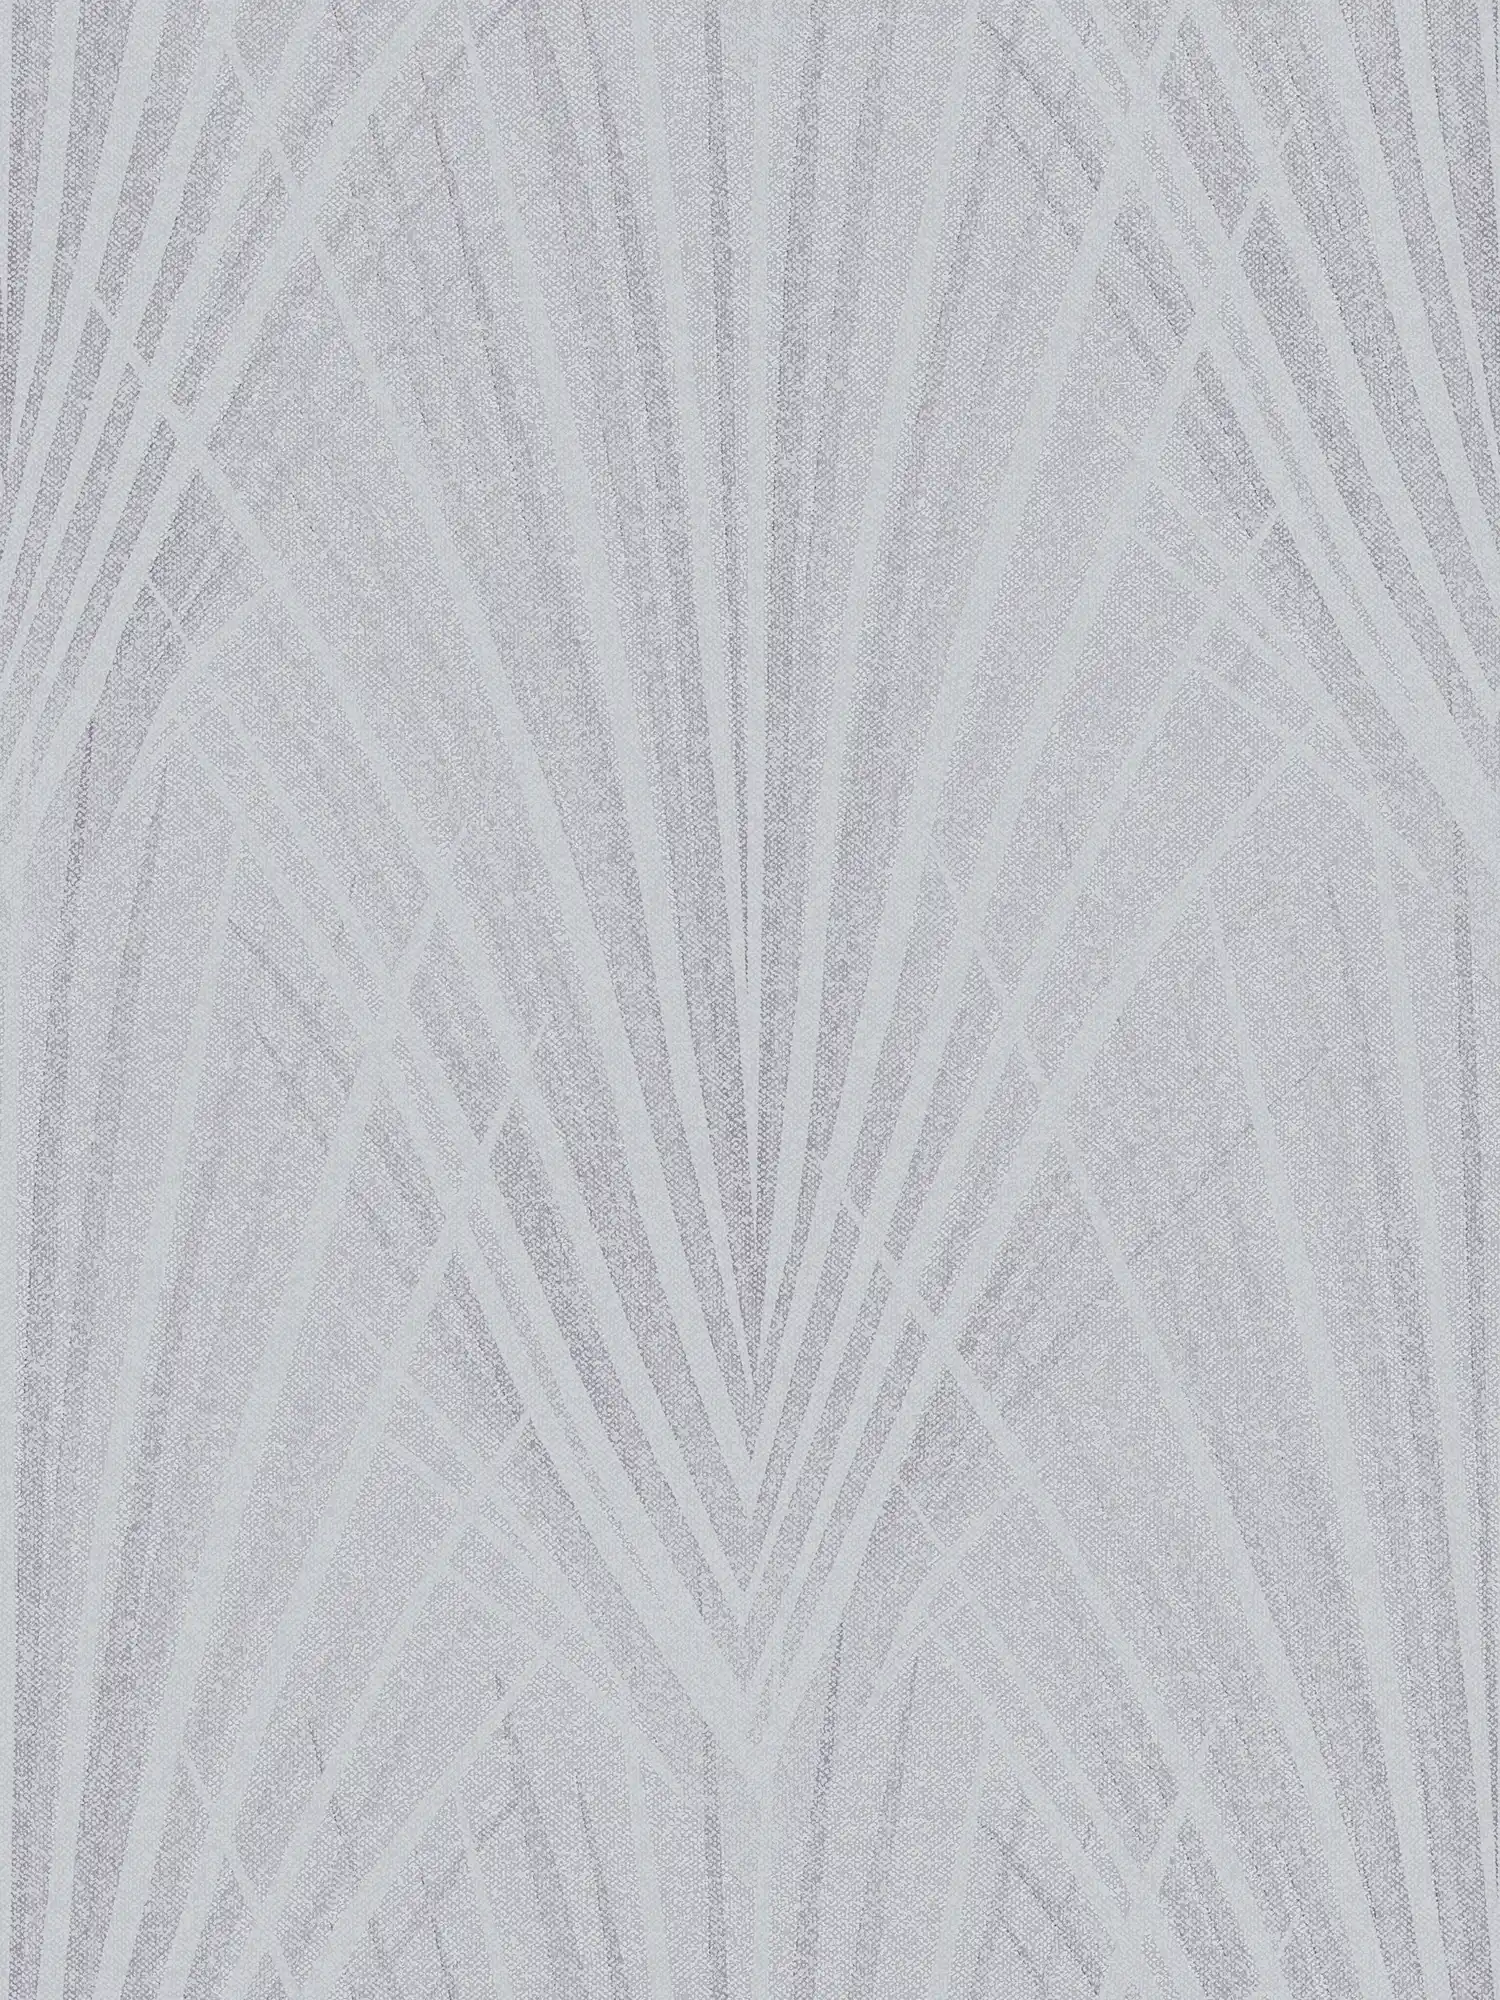 Non-woven wallpaper fern leaf pattern abstract - blue, grey
